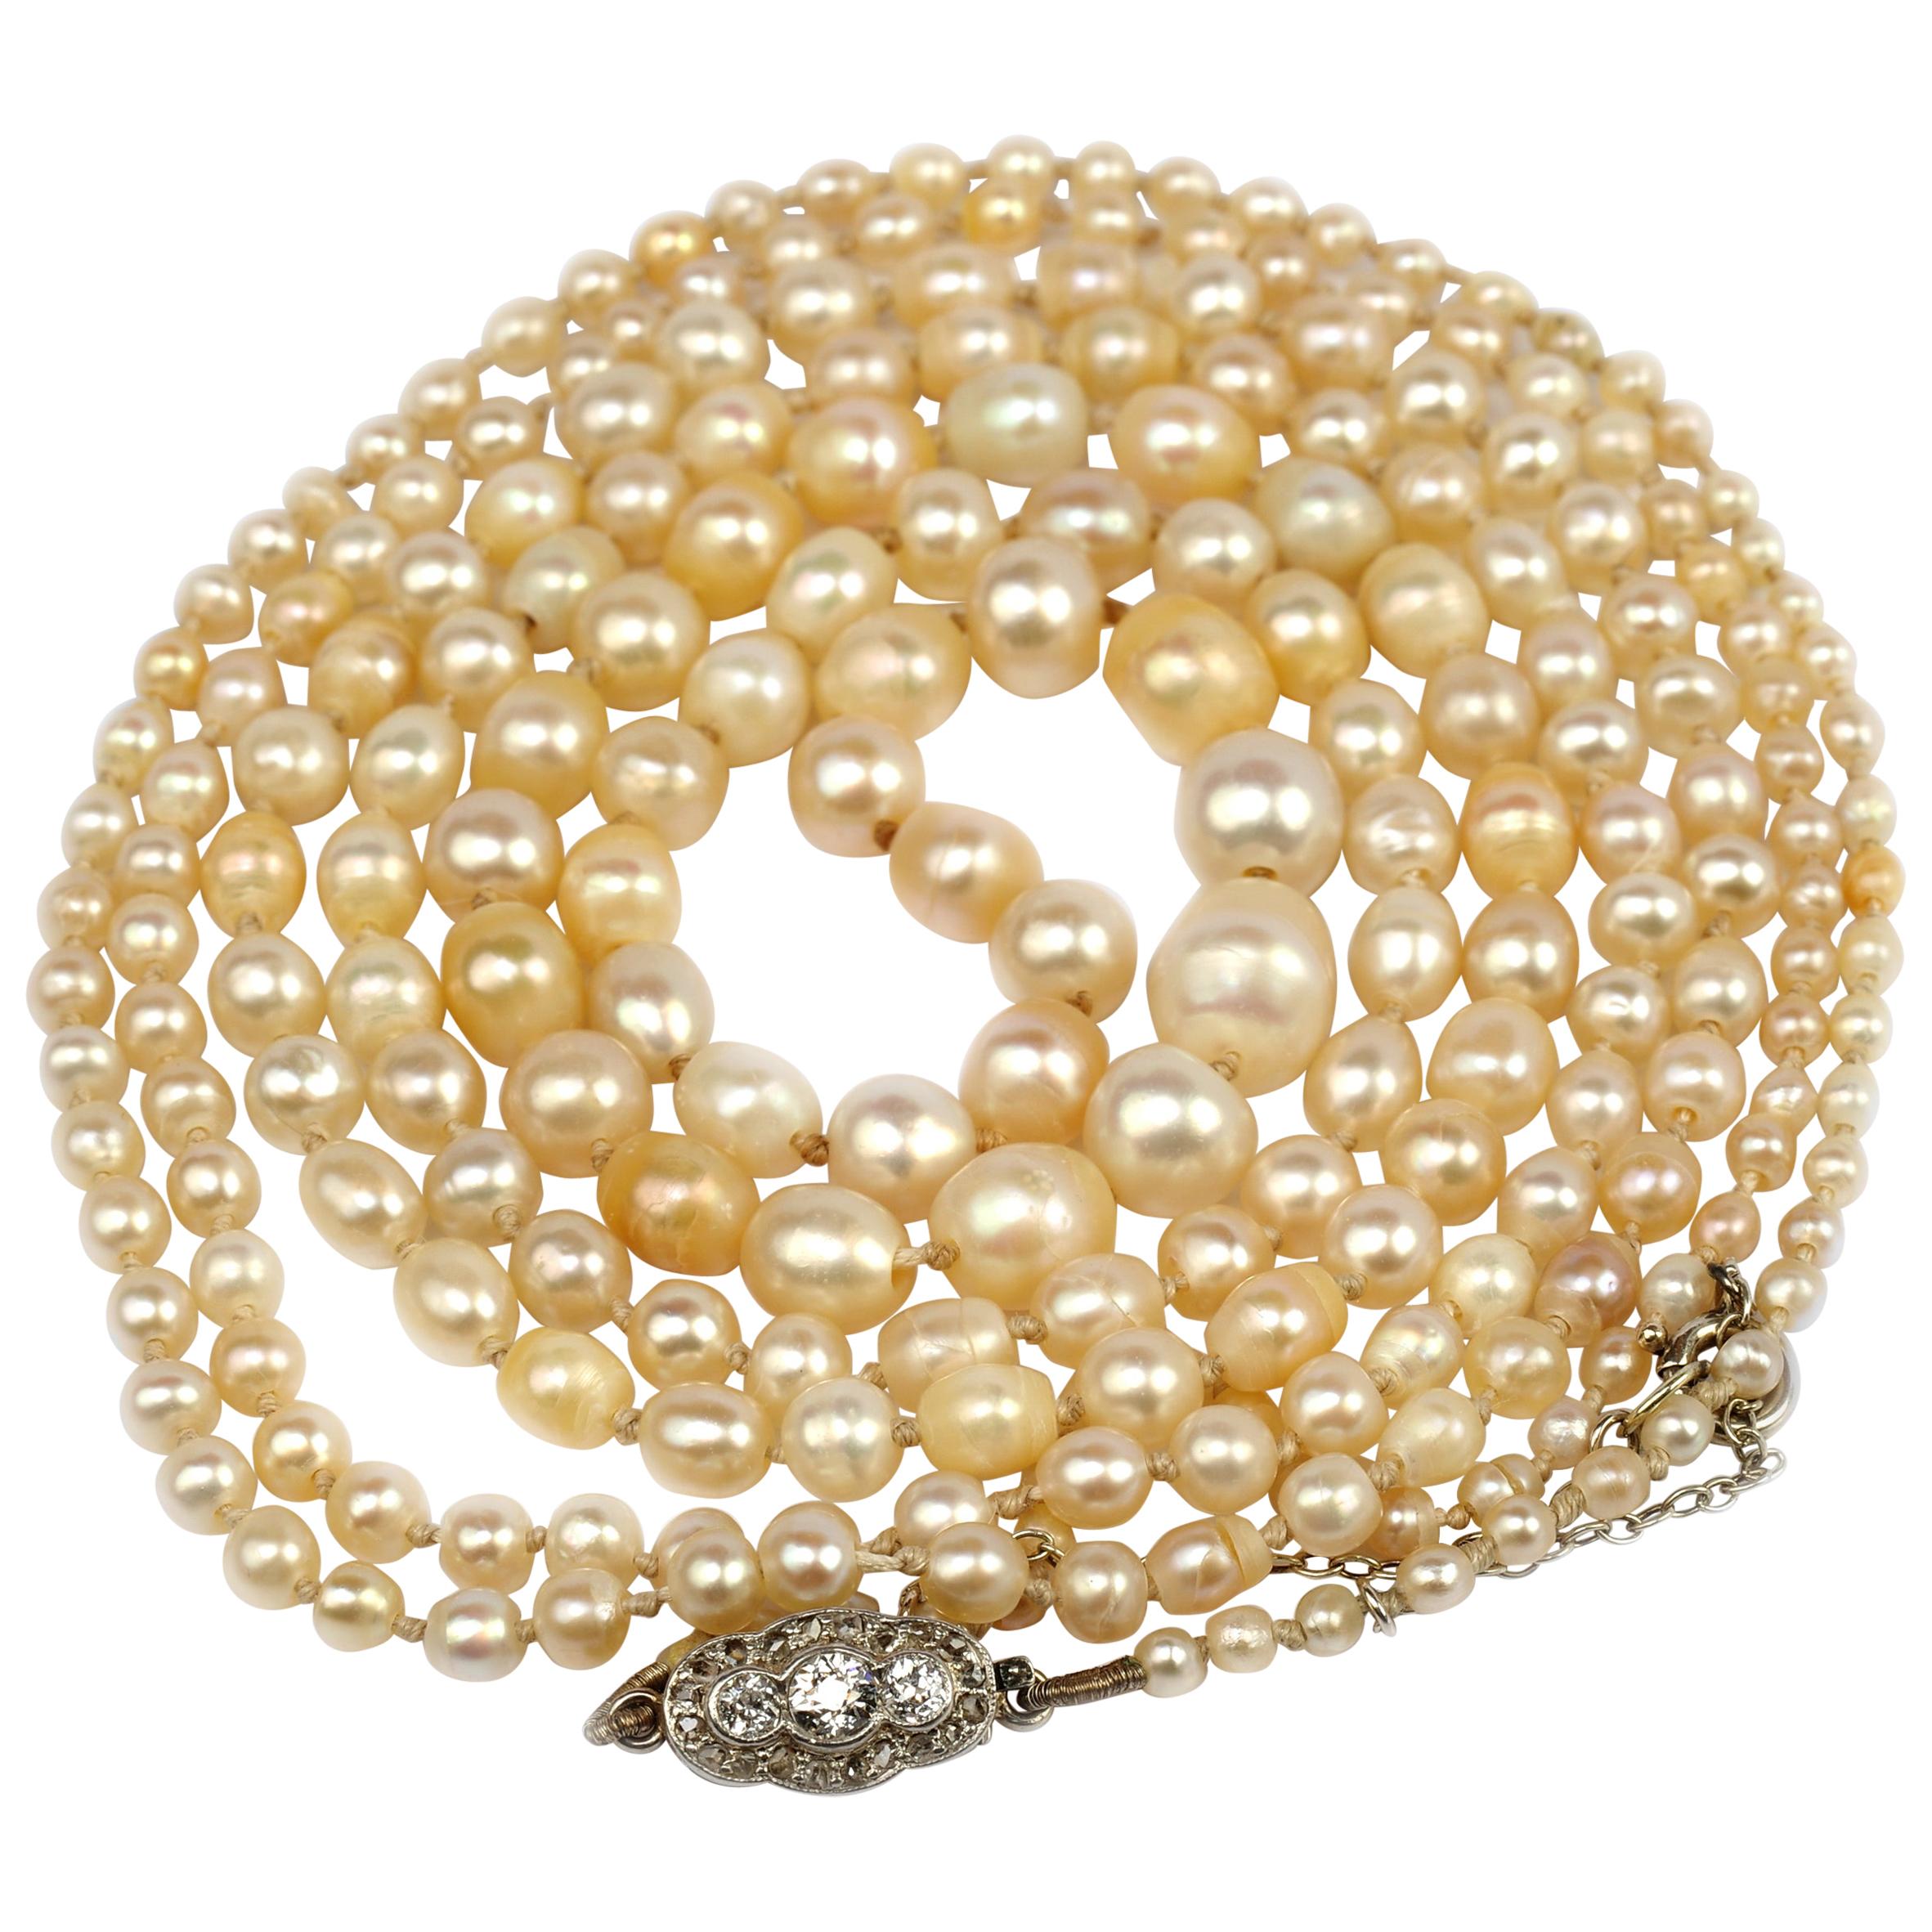 Edwardian Natural Pearl Necklace Diamond Clasp Certified Natural Pearls